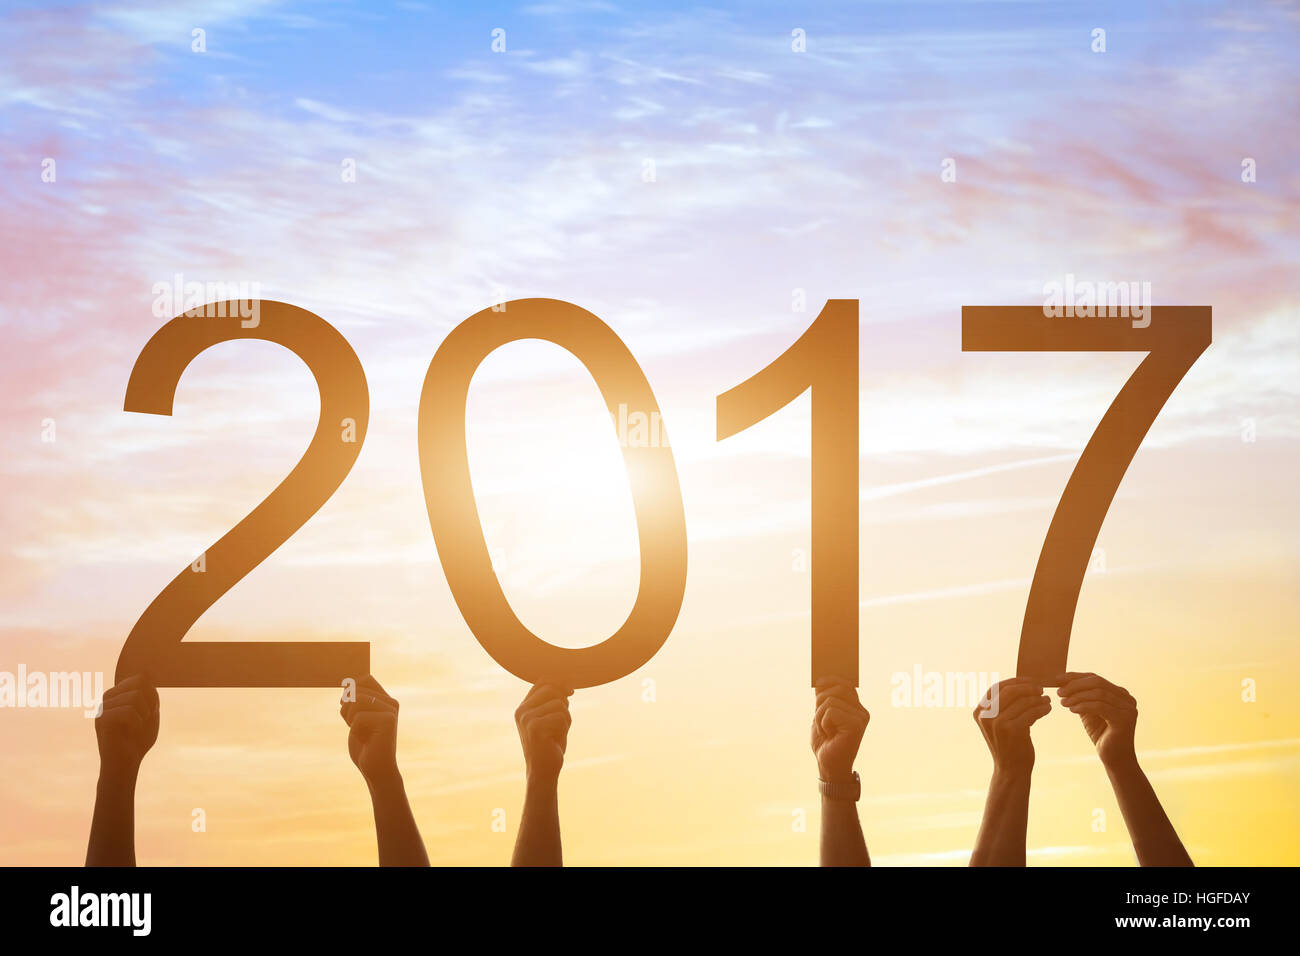 2017 sign, beautiful card about new year, silhouettes of hands holding digits at sunset sky Stock Photo